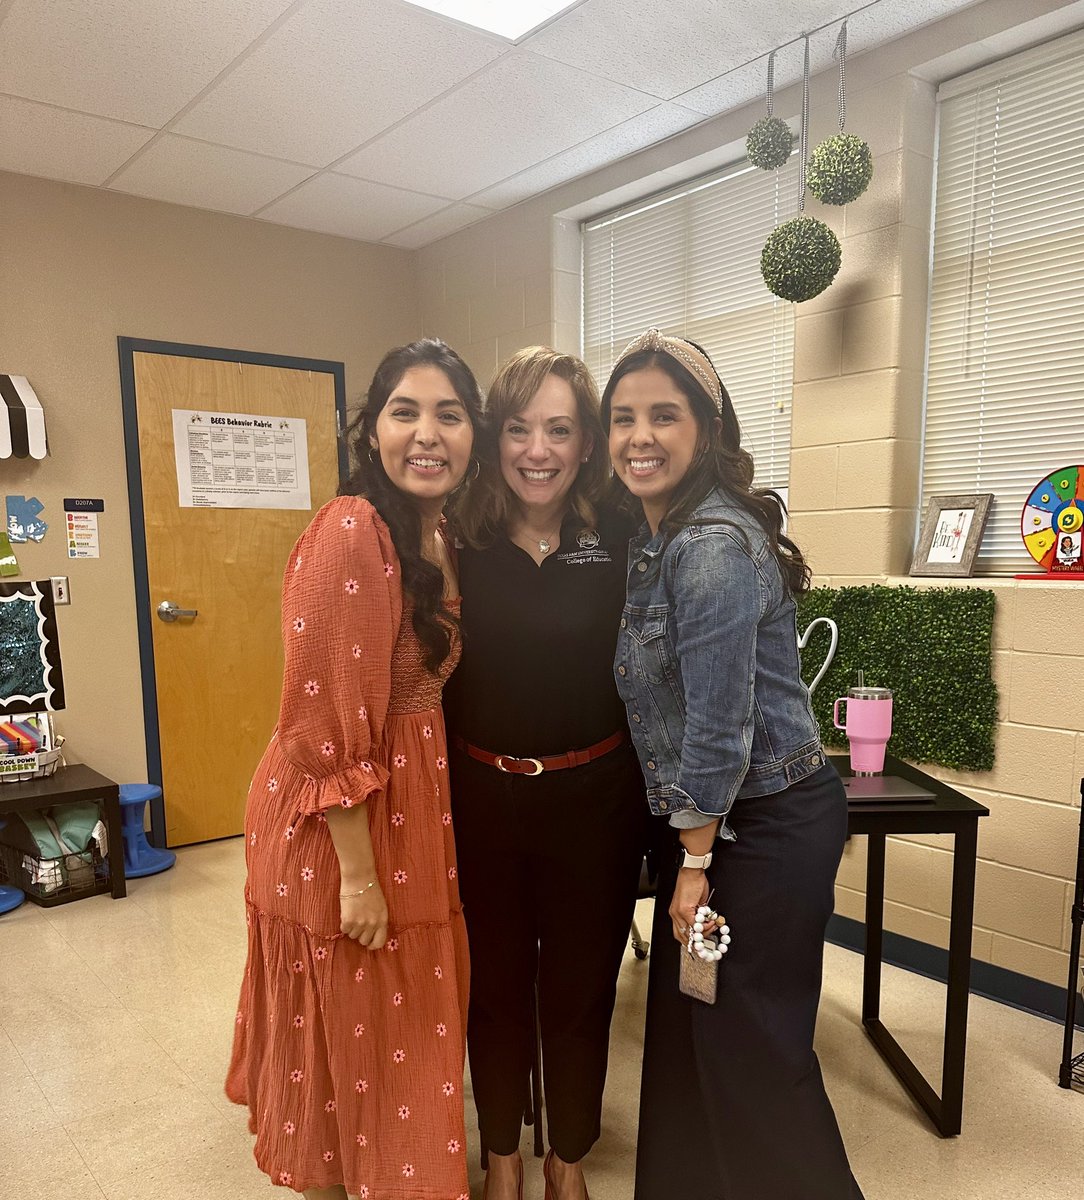 A true #TeamNorthside  and full circle moment today! My third grade teacher from Scobee walked into my 3rd grade classroom! 🥰 @NISD